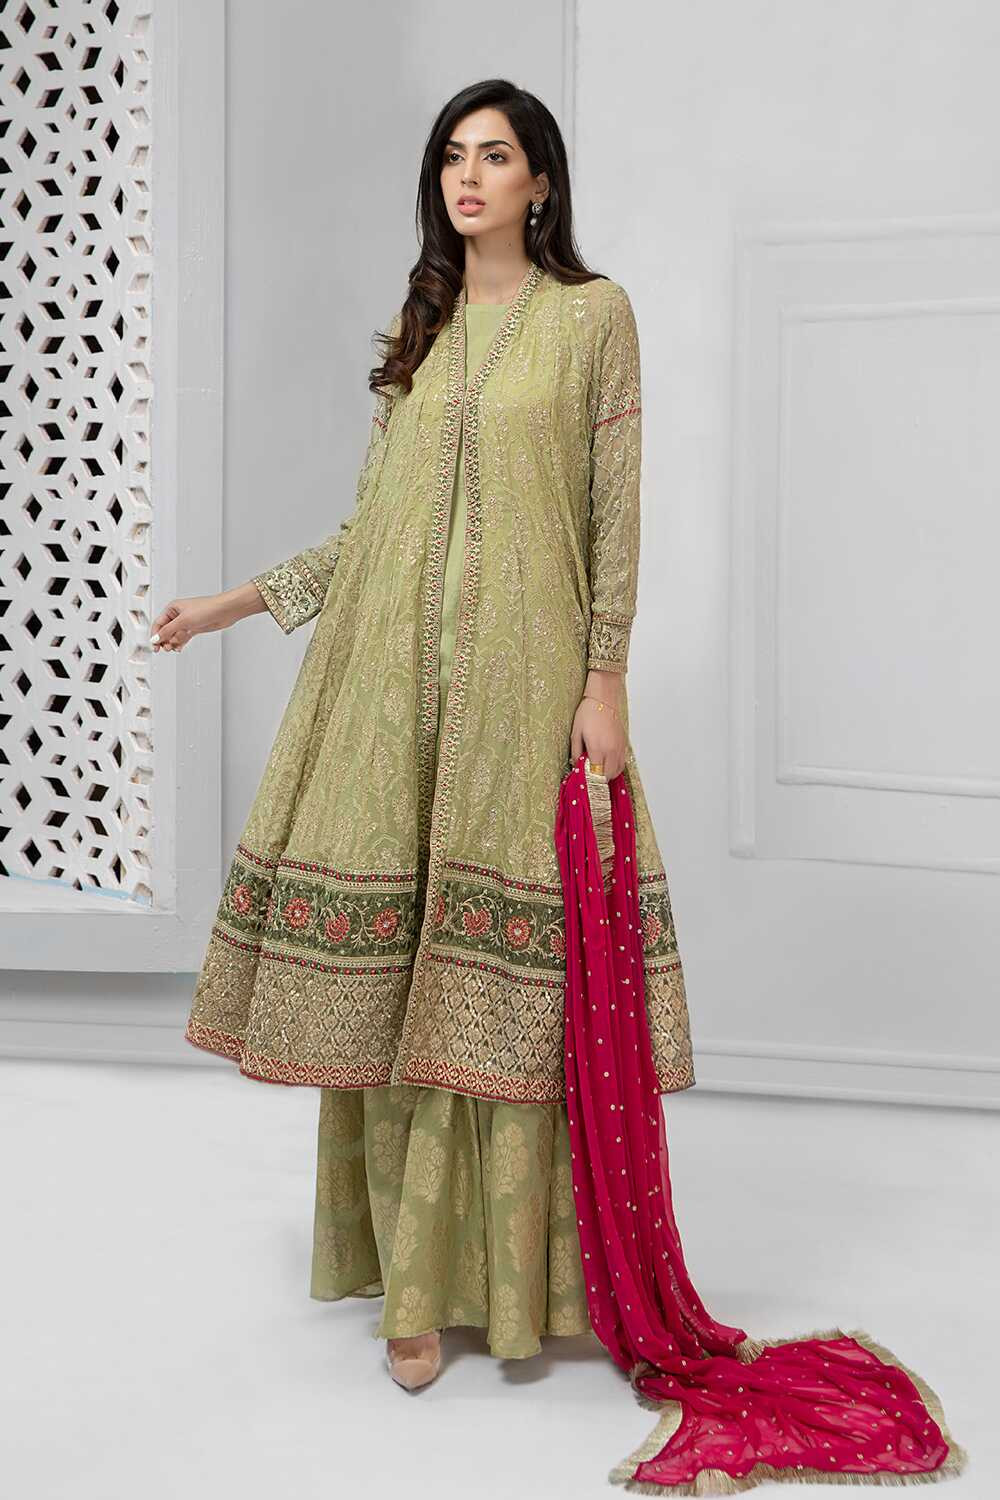 /2019/07/mariab-eid-collection-suit-green-sf-1690-image1.jpeg